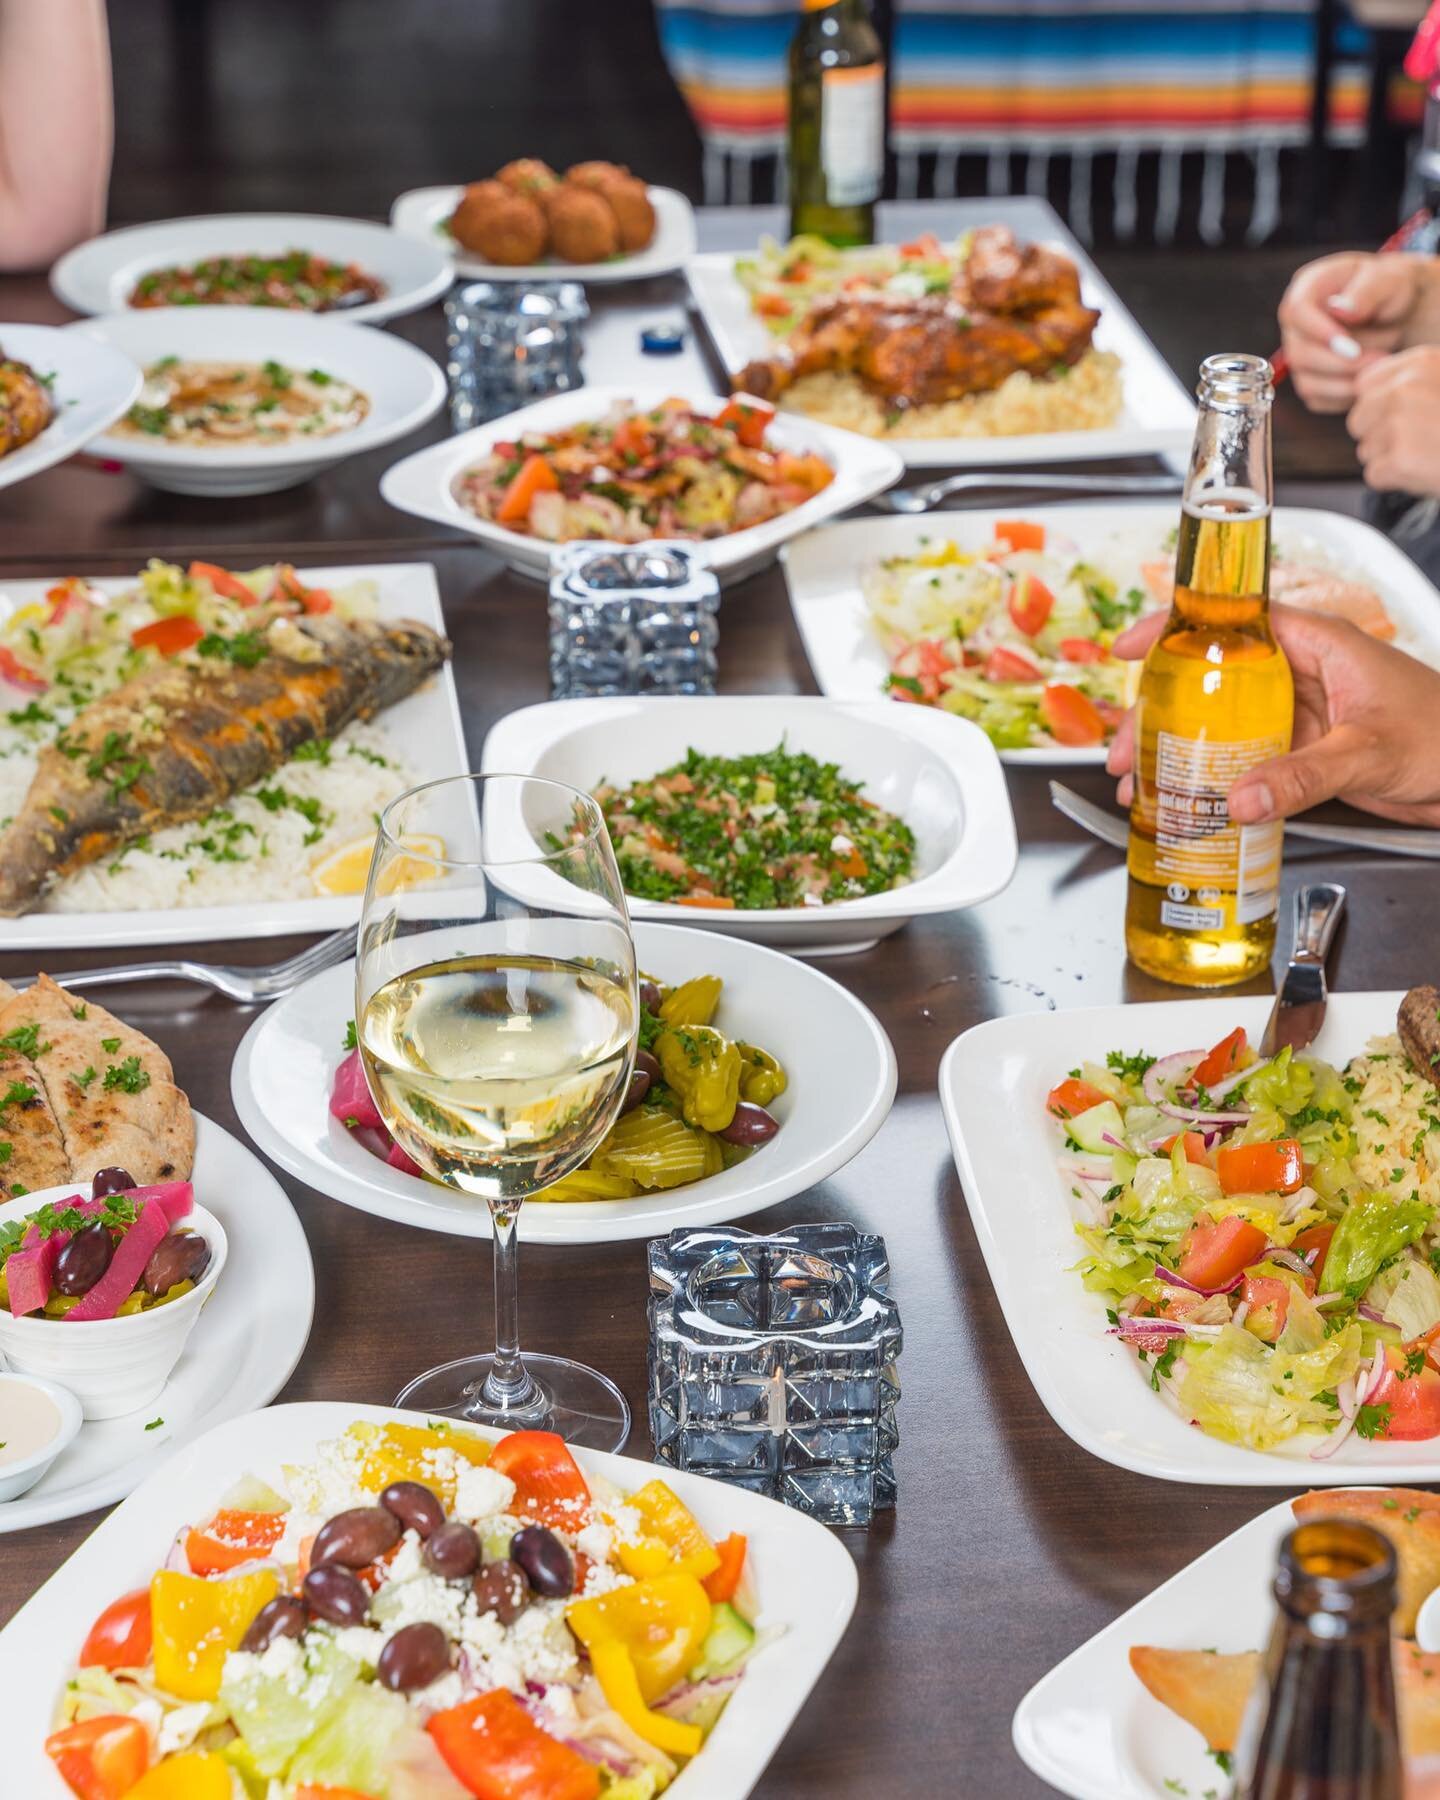 We have got something for everyone 

Dine-in &bull; Take out &bull; Delivery &bull; Catering 
Sunday- Thursday 11am to 10pm
Friday- Saturday 12pm to 11pm 

#tastetoronto #mediterraneanfood #food #to_finest #tofinest #torontofoodblog #yyzfood 
#toront